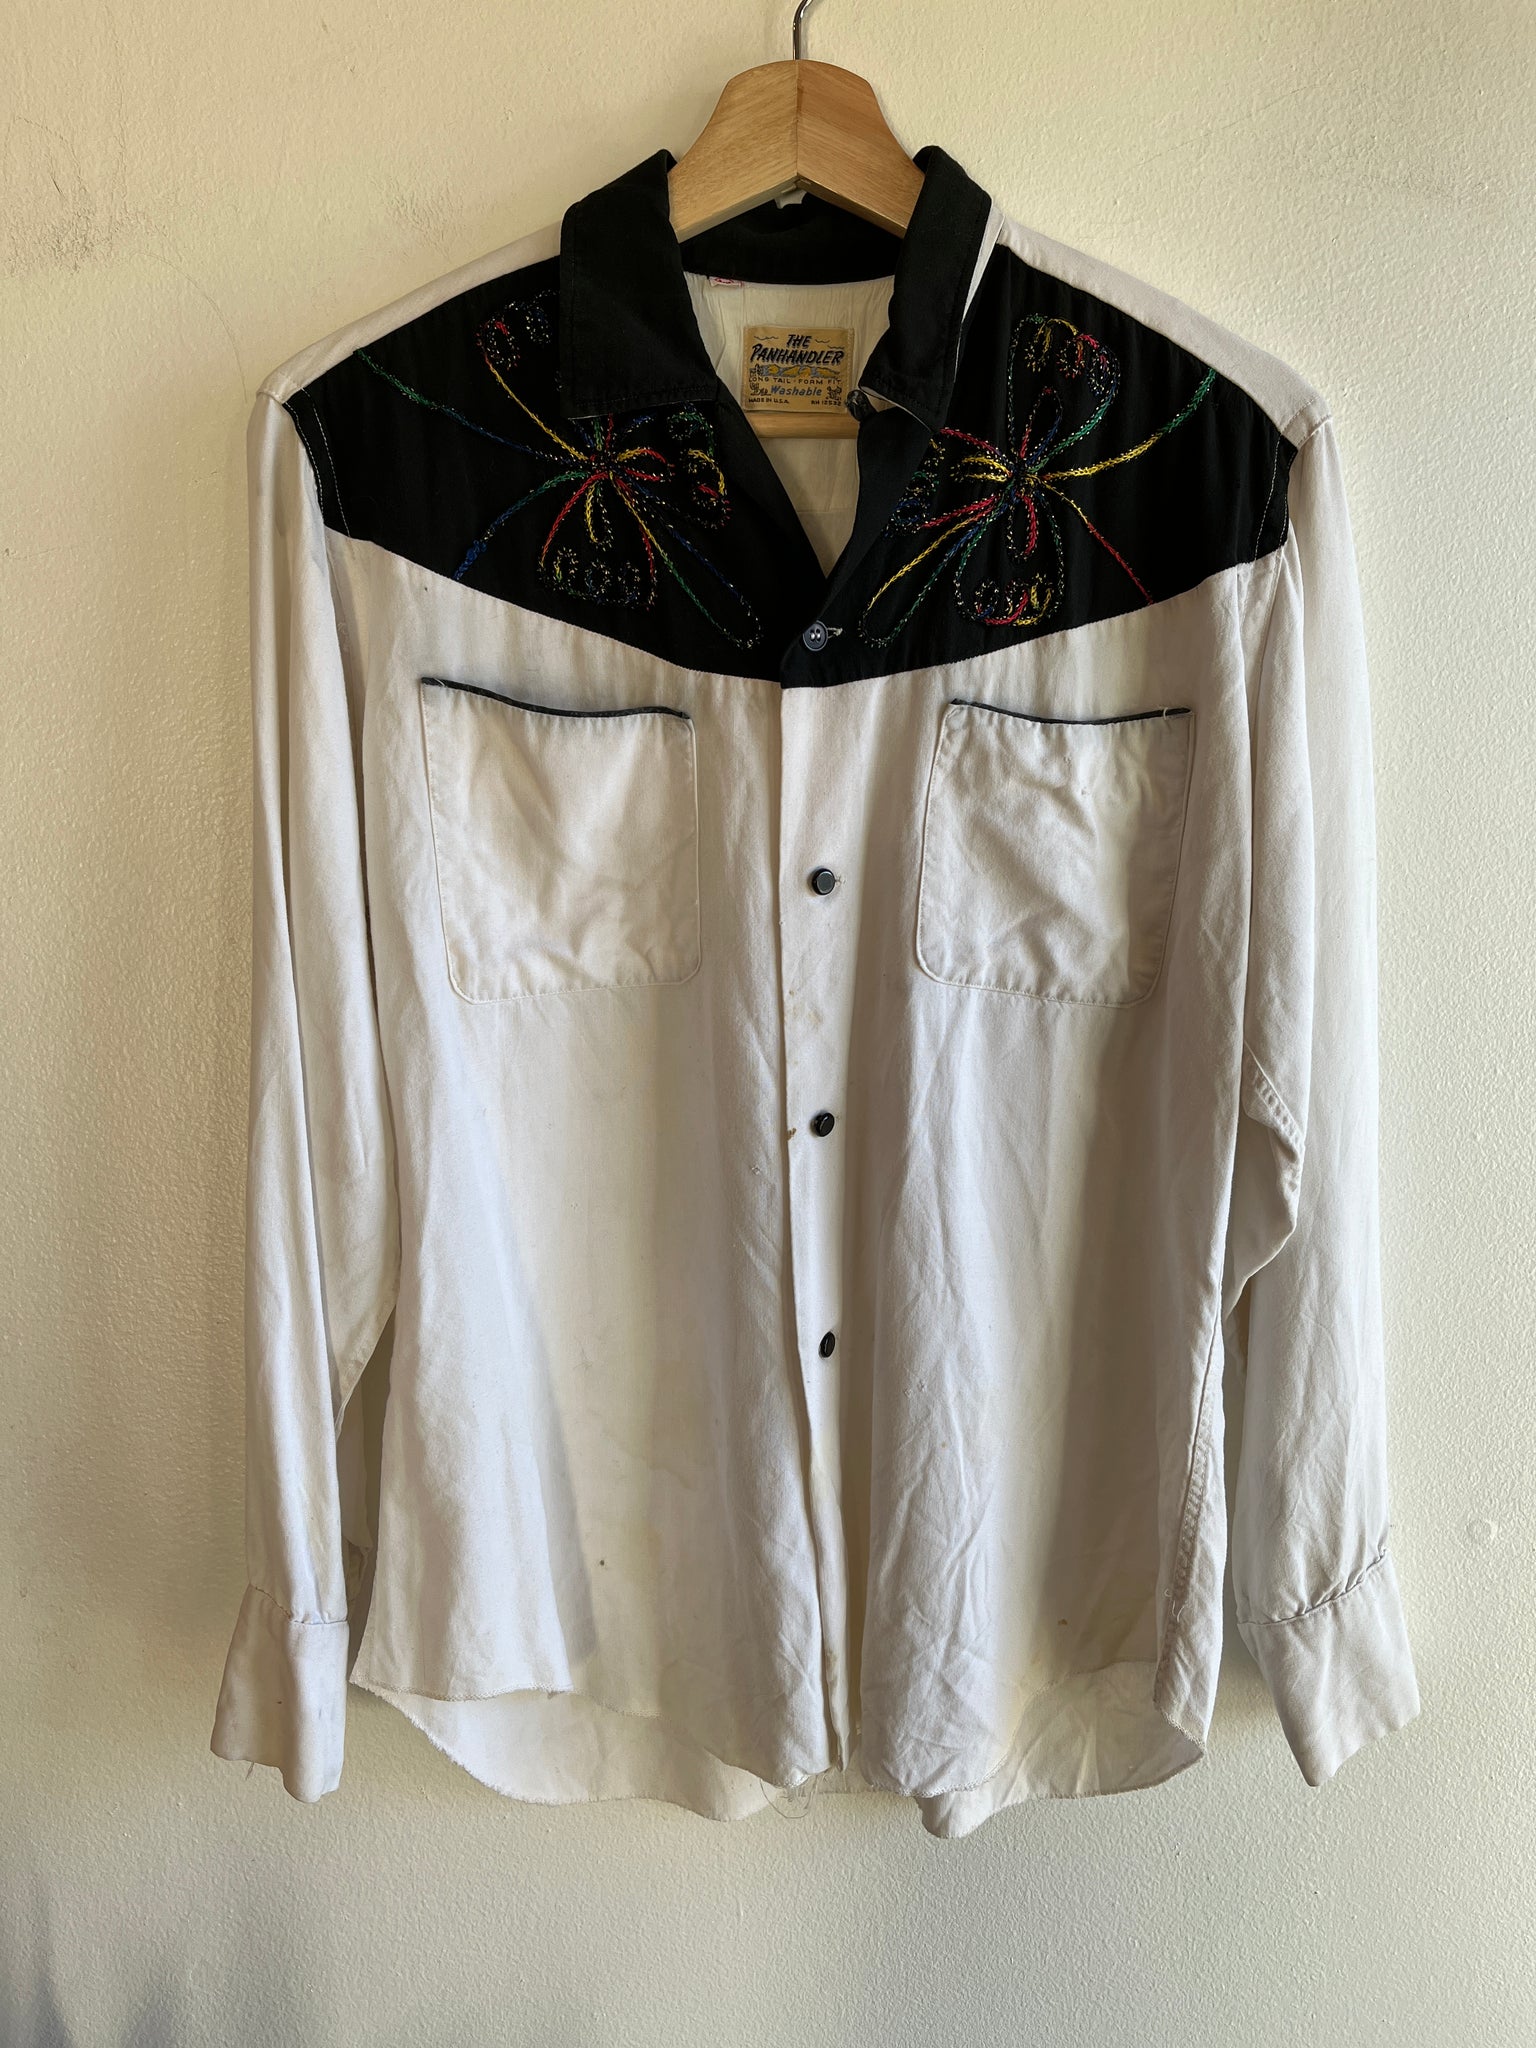 Vintage 1960’s “The Panhandler” Western Button-Up Shirt